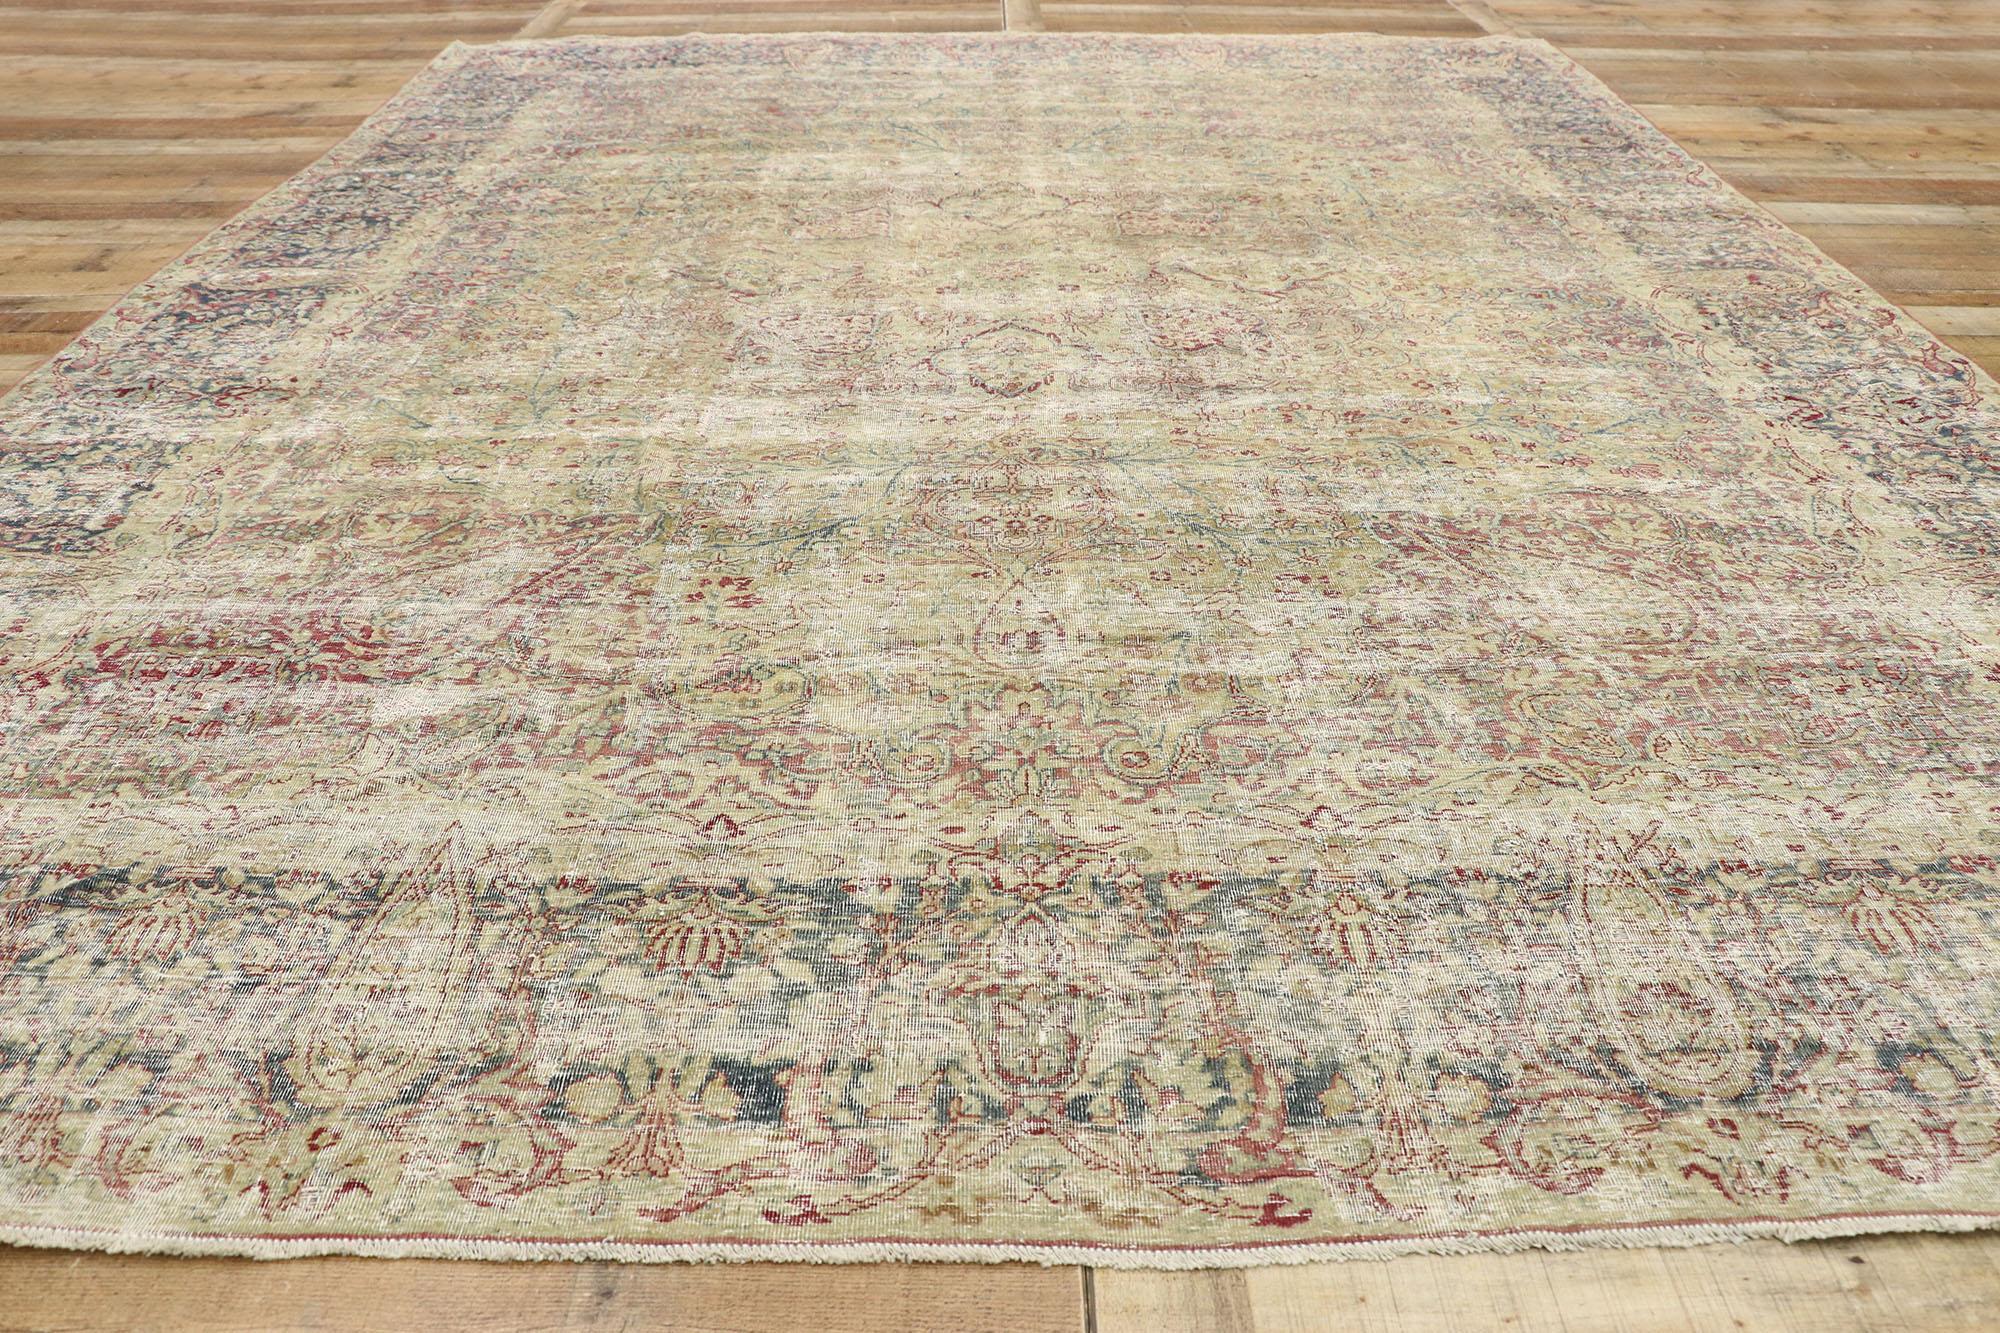 Wool Distressed Antique Persian Kerman Rug with Modern Rustic English Cottage Style For Sale